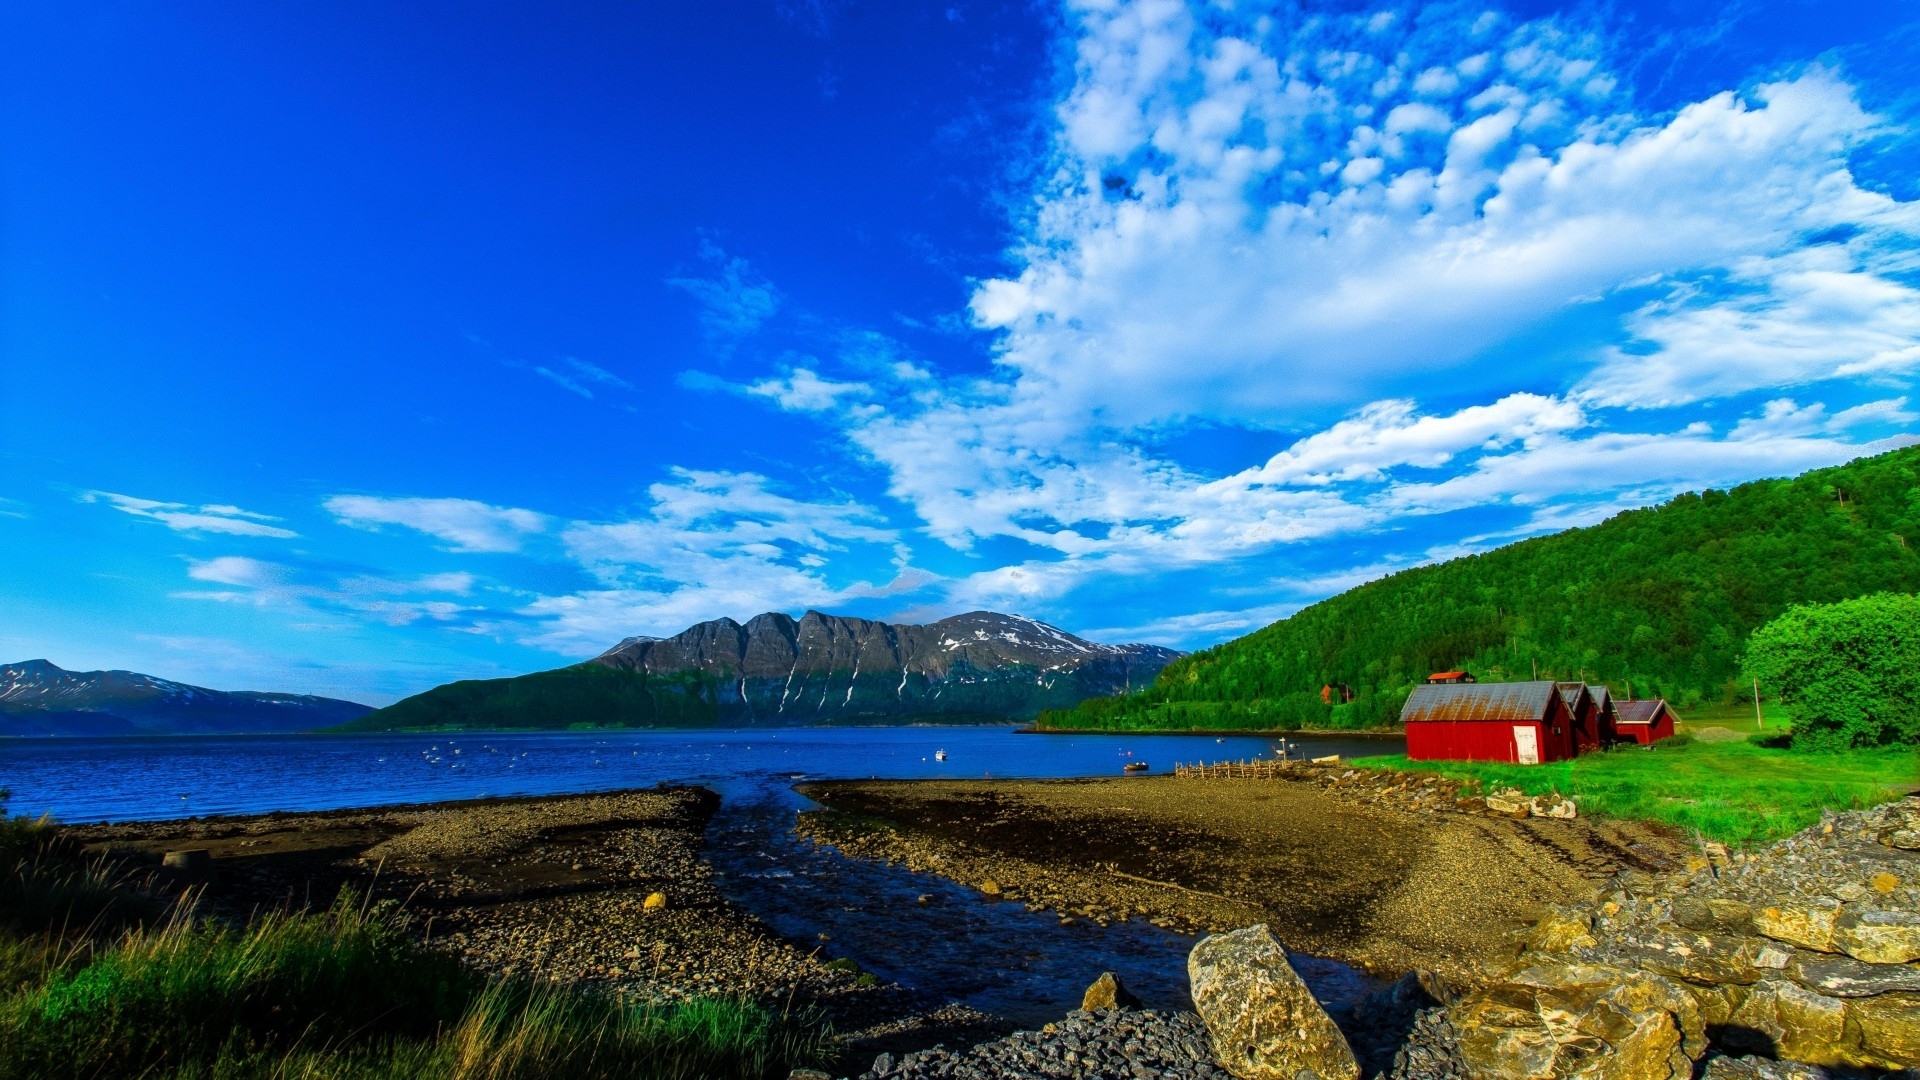 clear, cottage, summer, nature, cabin, clouds, lakeshore, lake Gallery HD Wallpaper